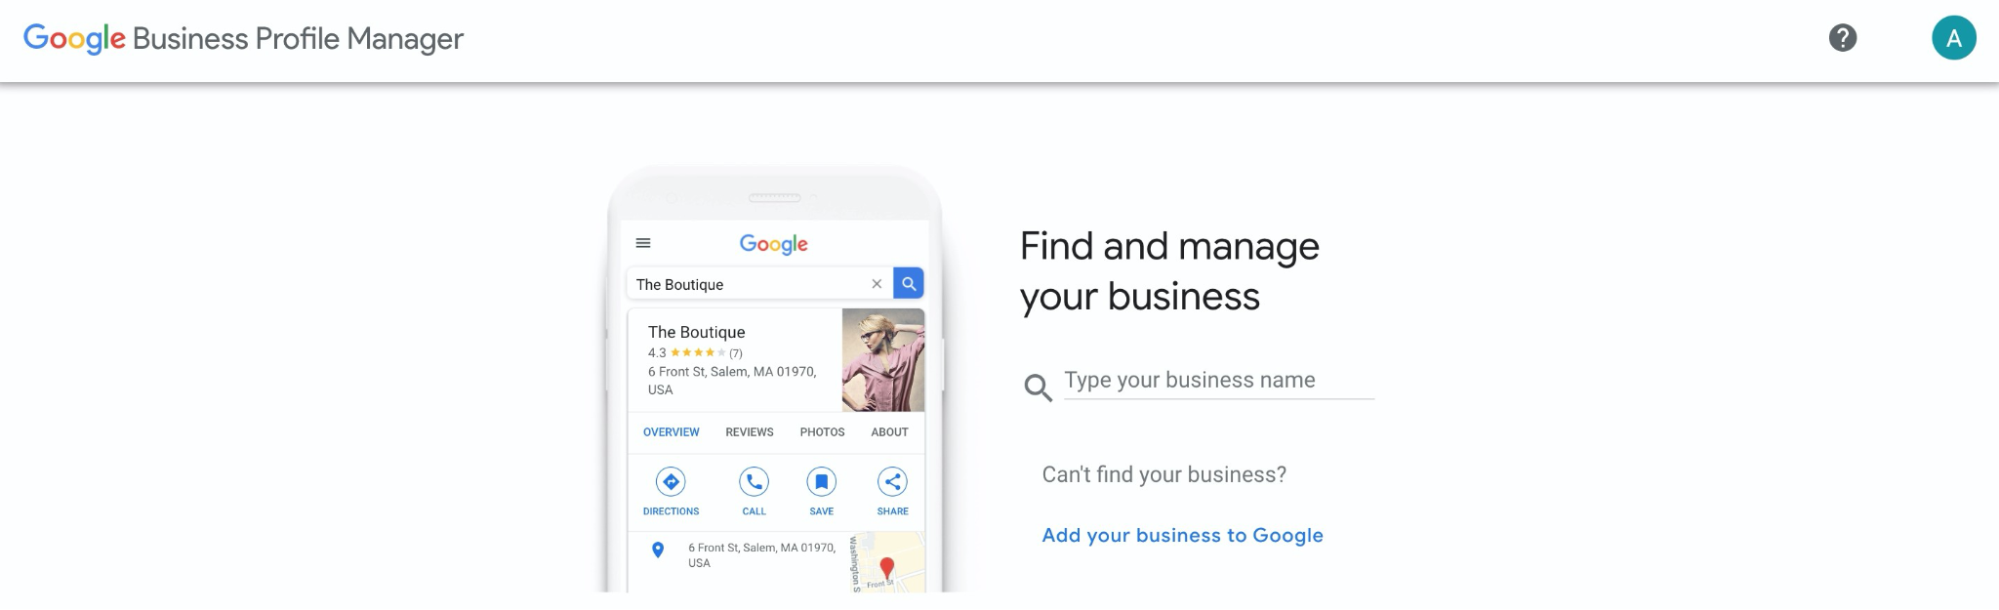 GBP screenshot Find and Manage your business with a search bar and image of mobile phone